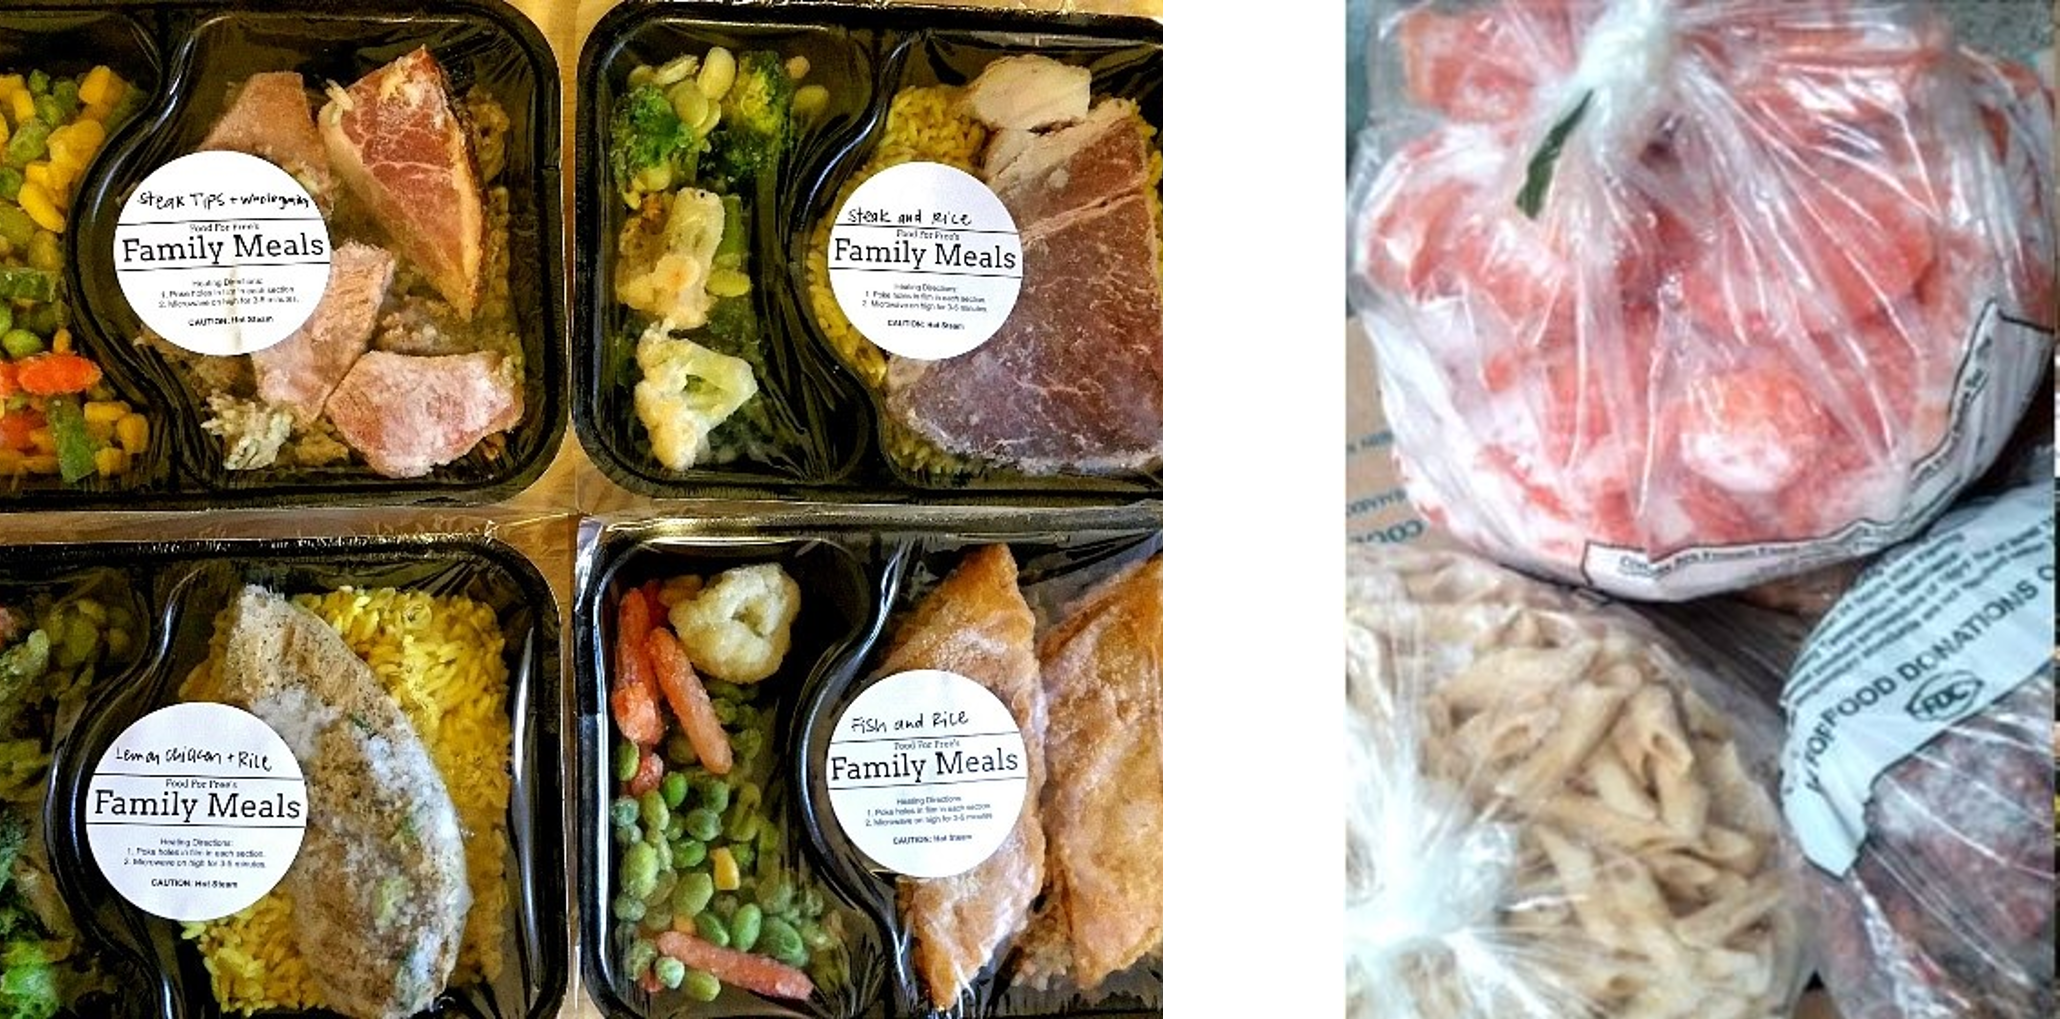 This is two pictures - one of which is four prepared meals for donation and the other is of bags of food for donation